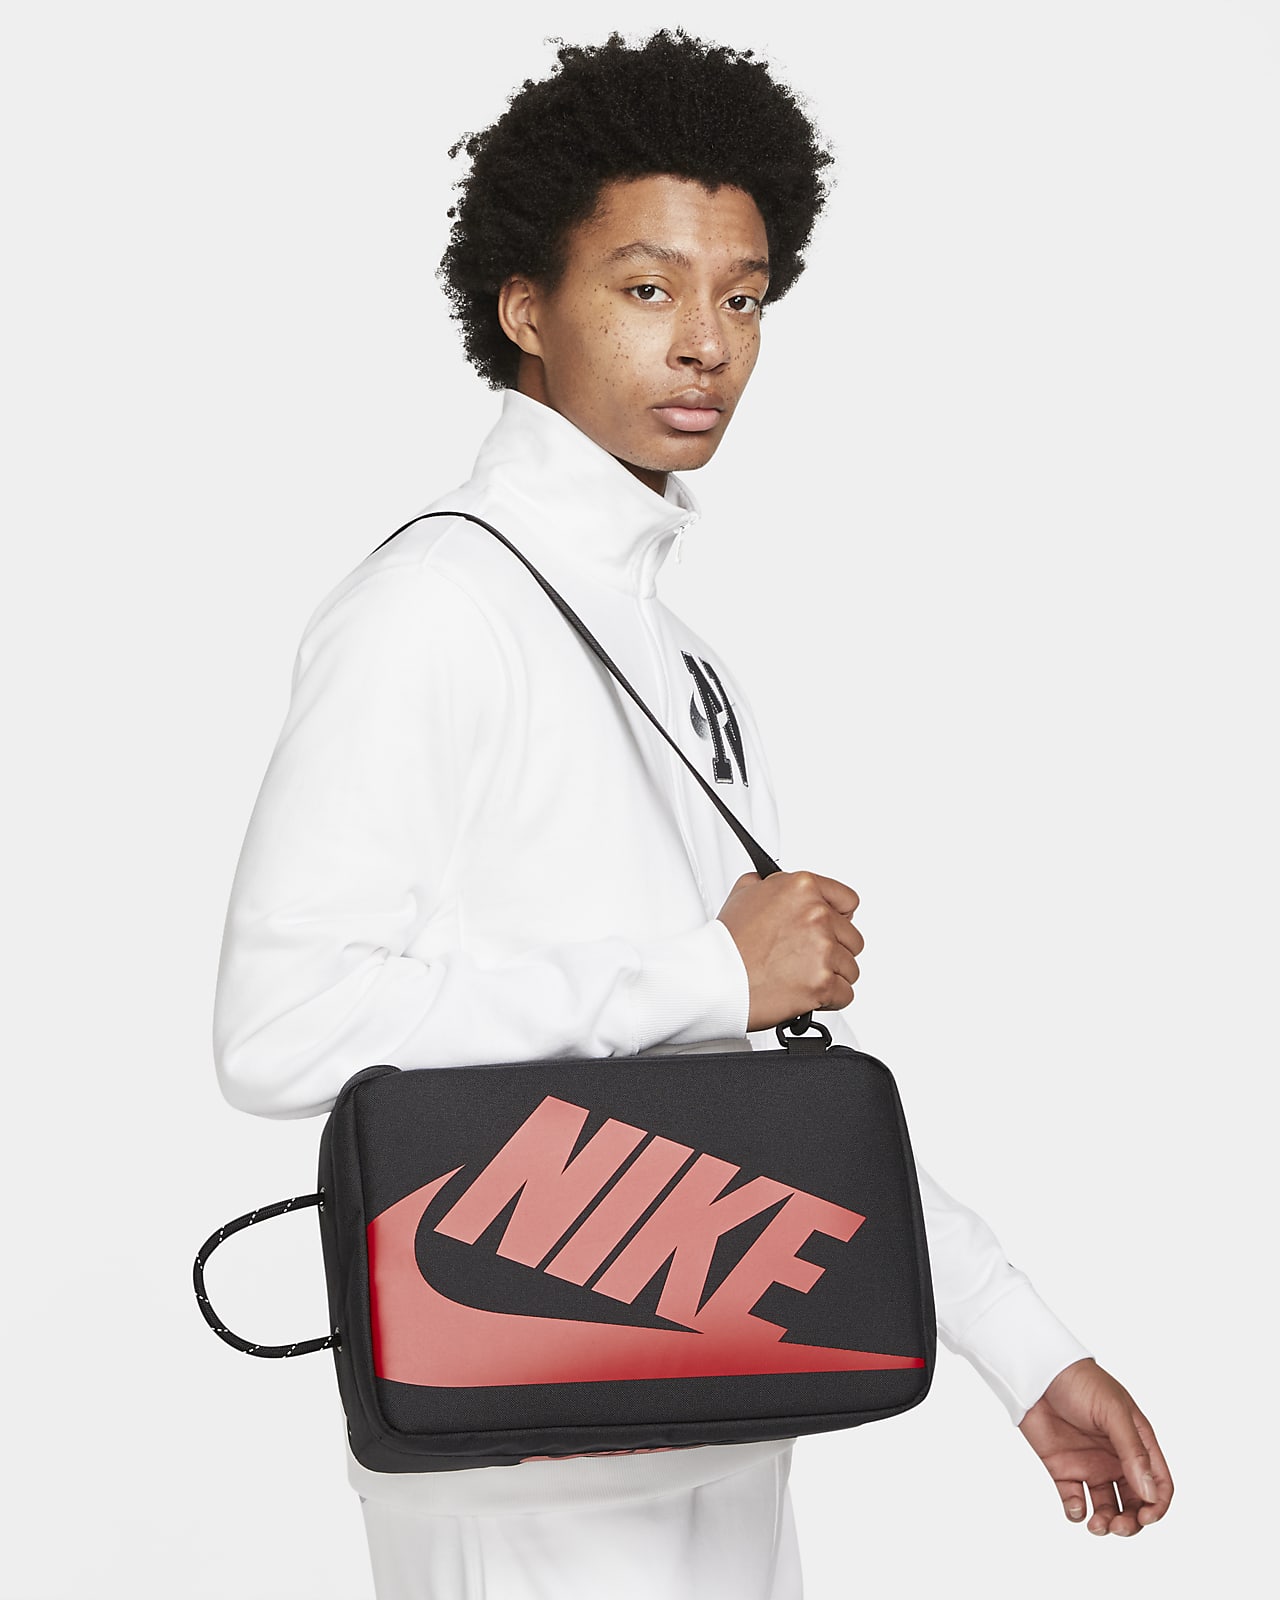 Nike Shoe Bag Classic Red Orange White Pouch 10L Bag Box Clutch, Men's  Fashion, Bags, Belt bags, Clutches and Pouches on Carousell